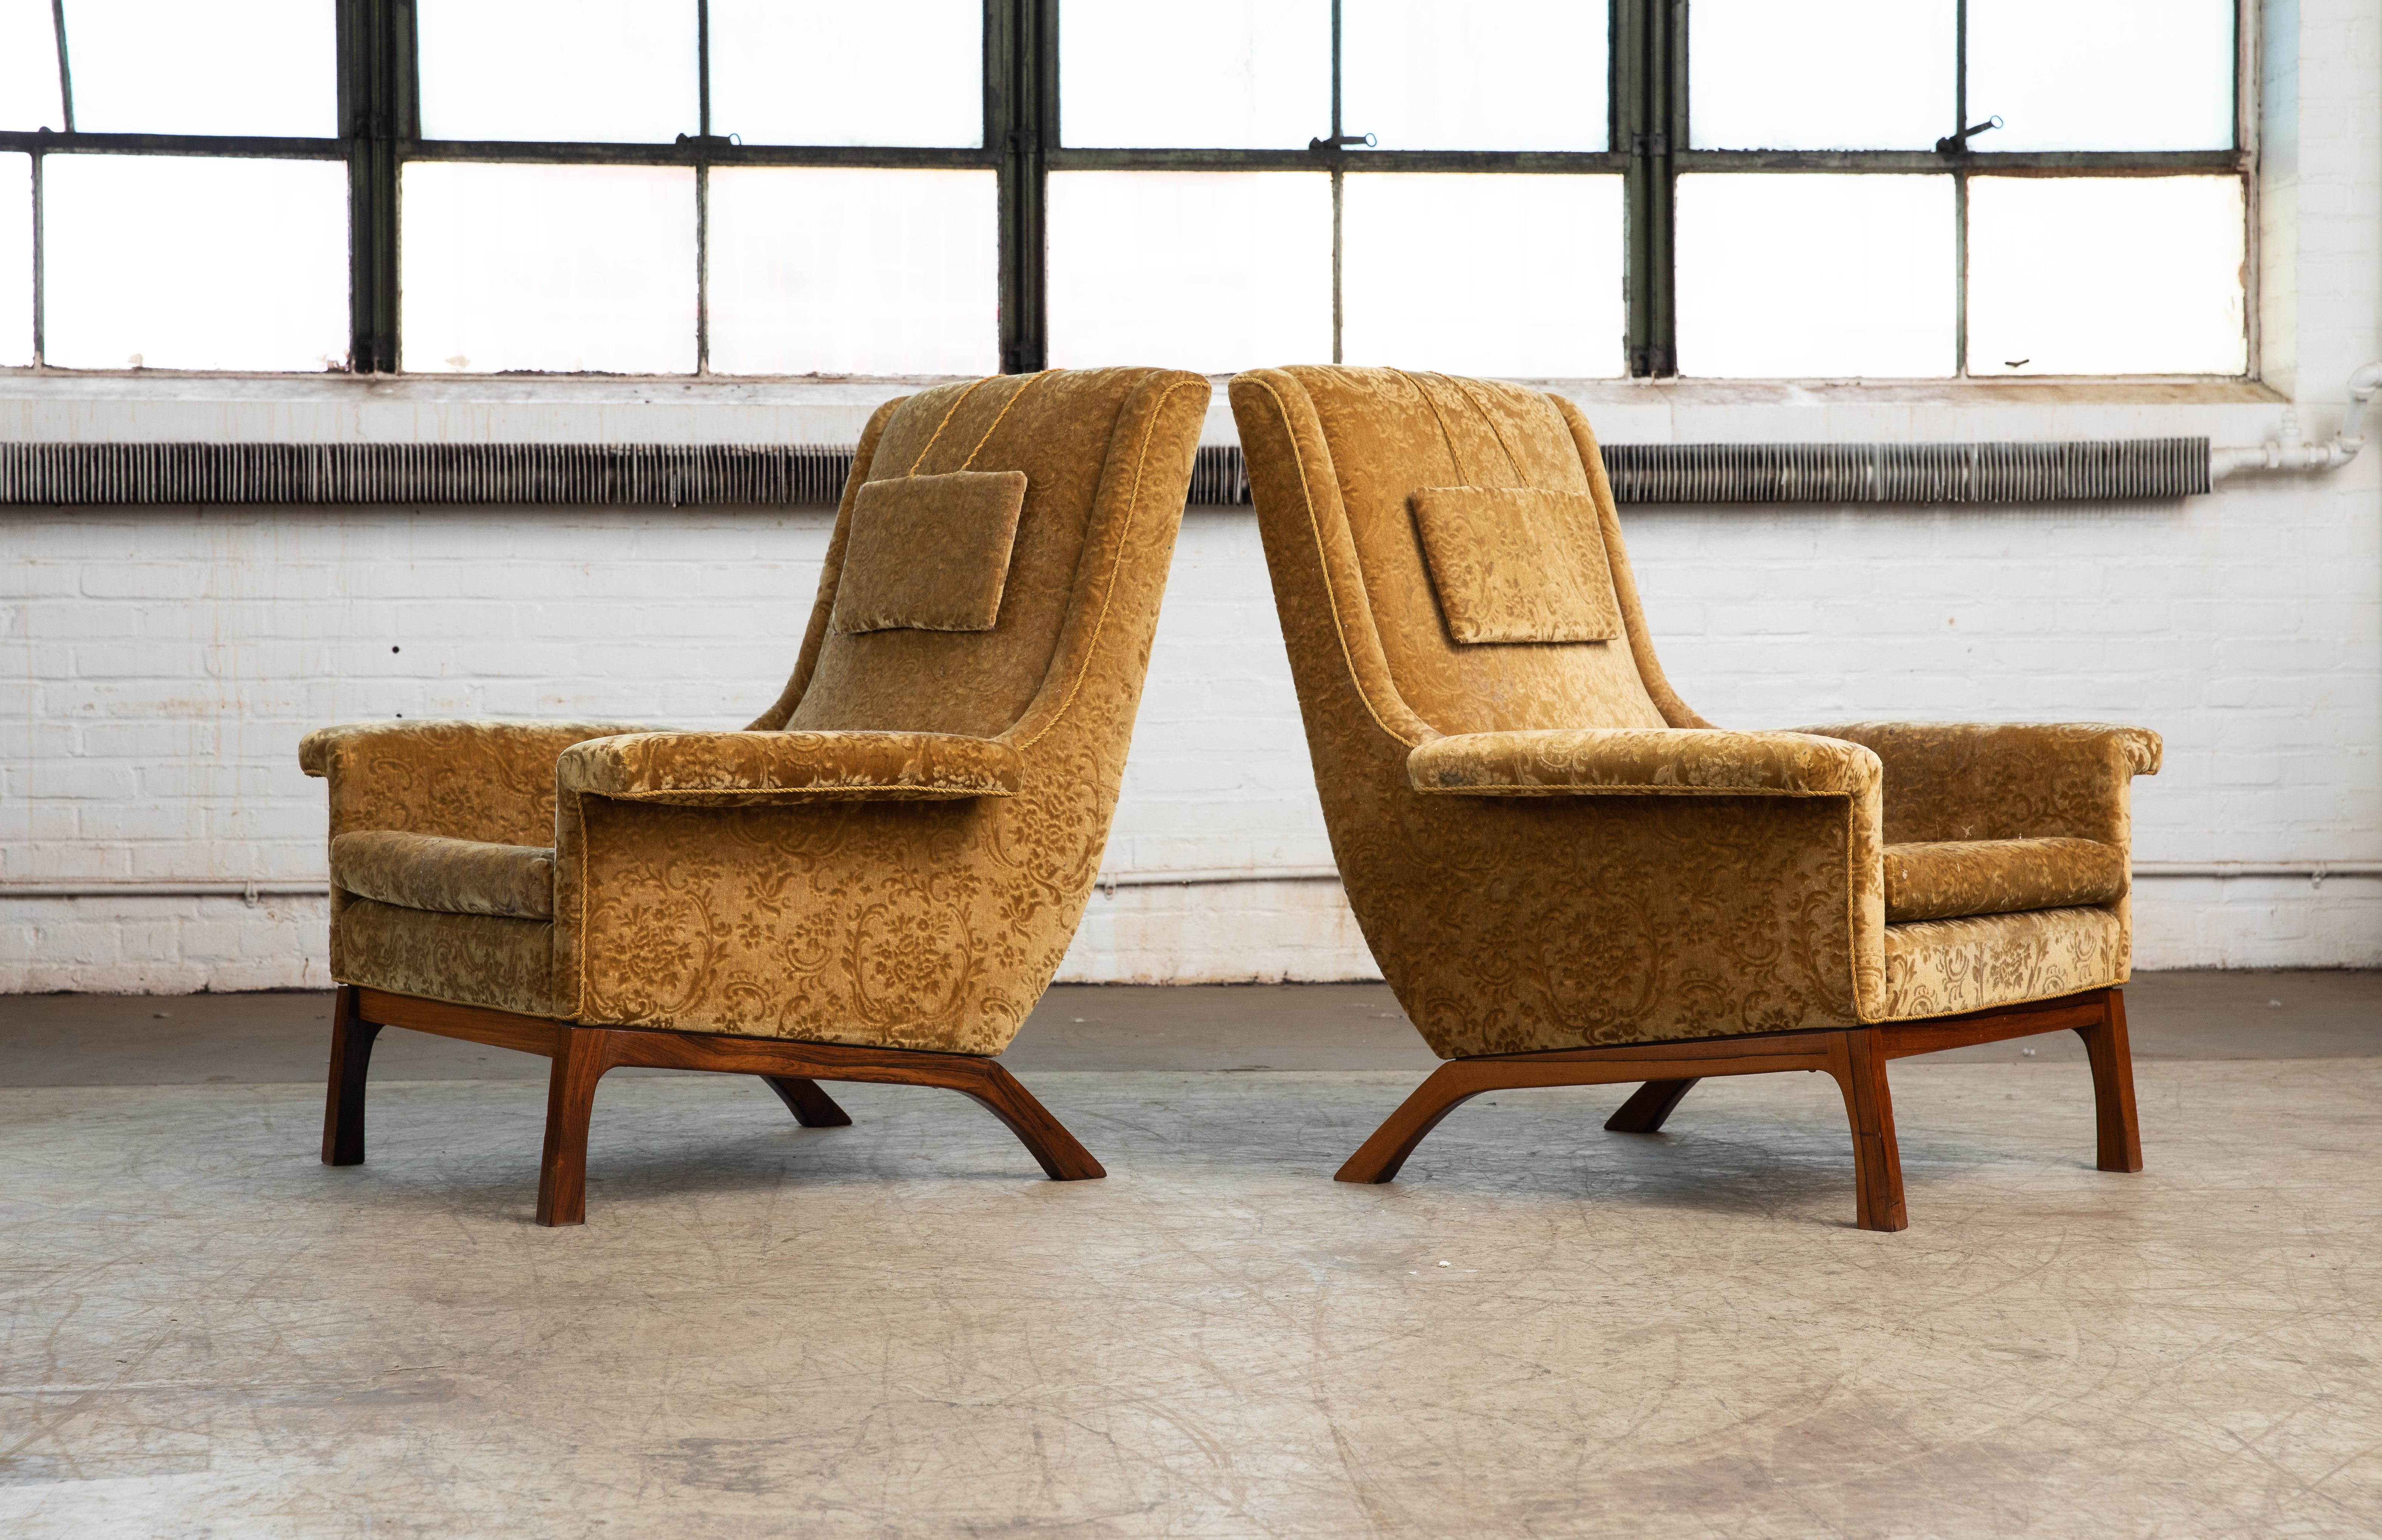 Classic and very elegant pair of lounge chairs in the style made famous by Folke Ohlsson in the mid 1950's for Fritz Hansen and DUX of Sweden. Probably made around 1960 we love the elegant angles of the chairs and the legs combined the slim